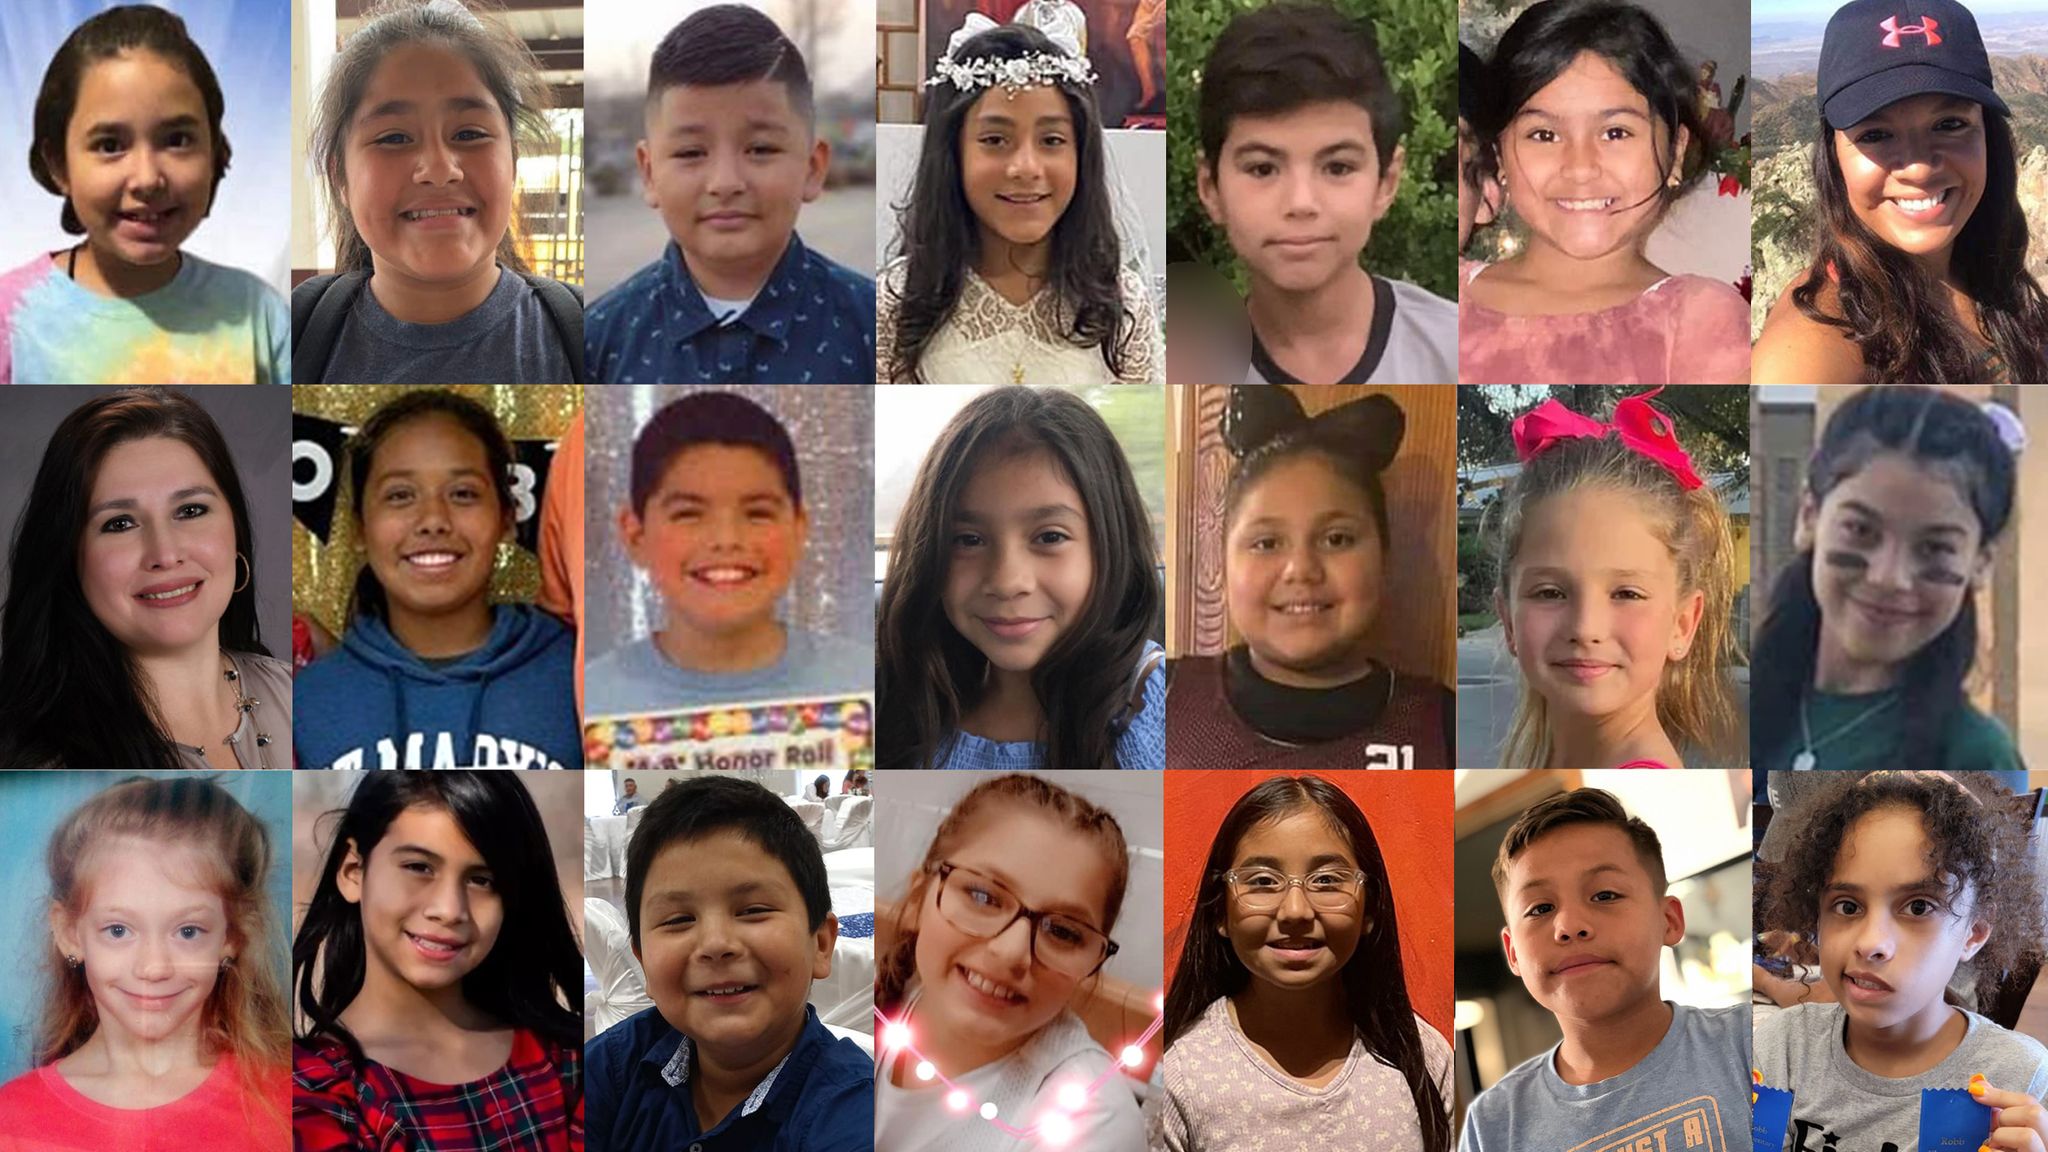 Texas school shooting: 21 victims named and pictured | US News | Sky News